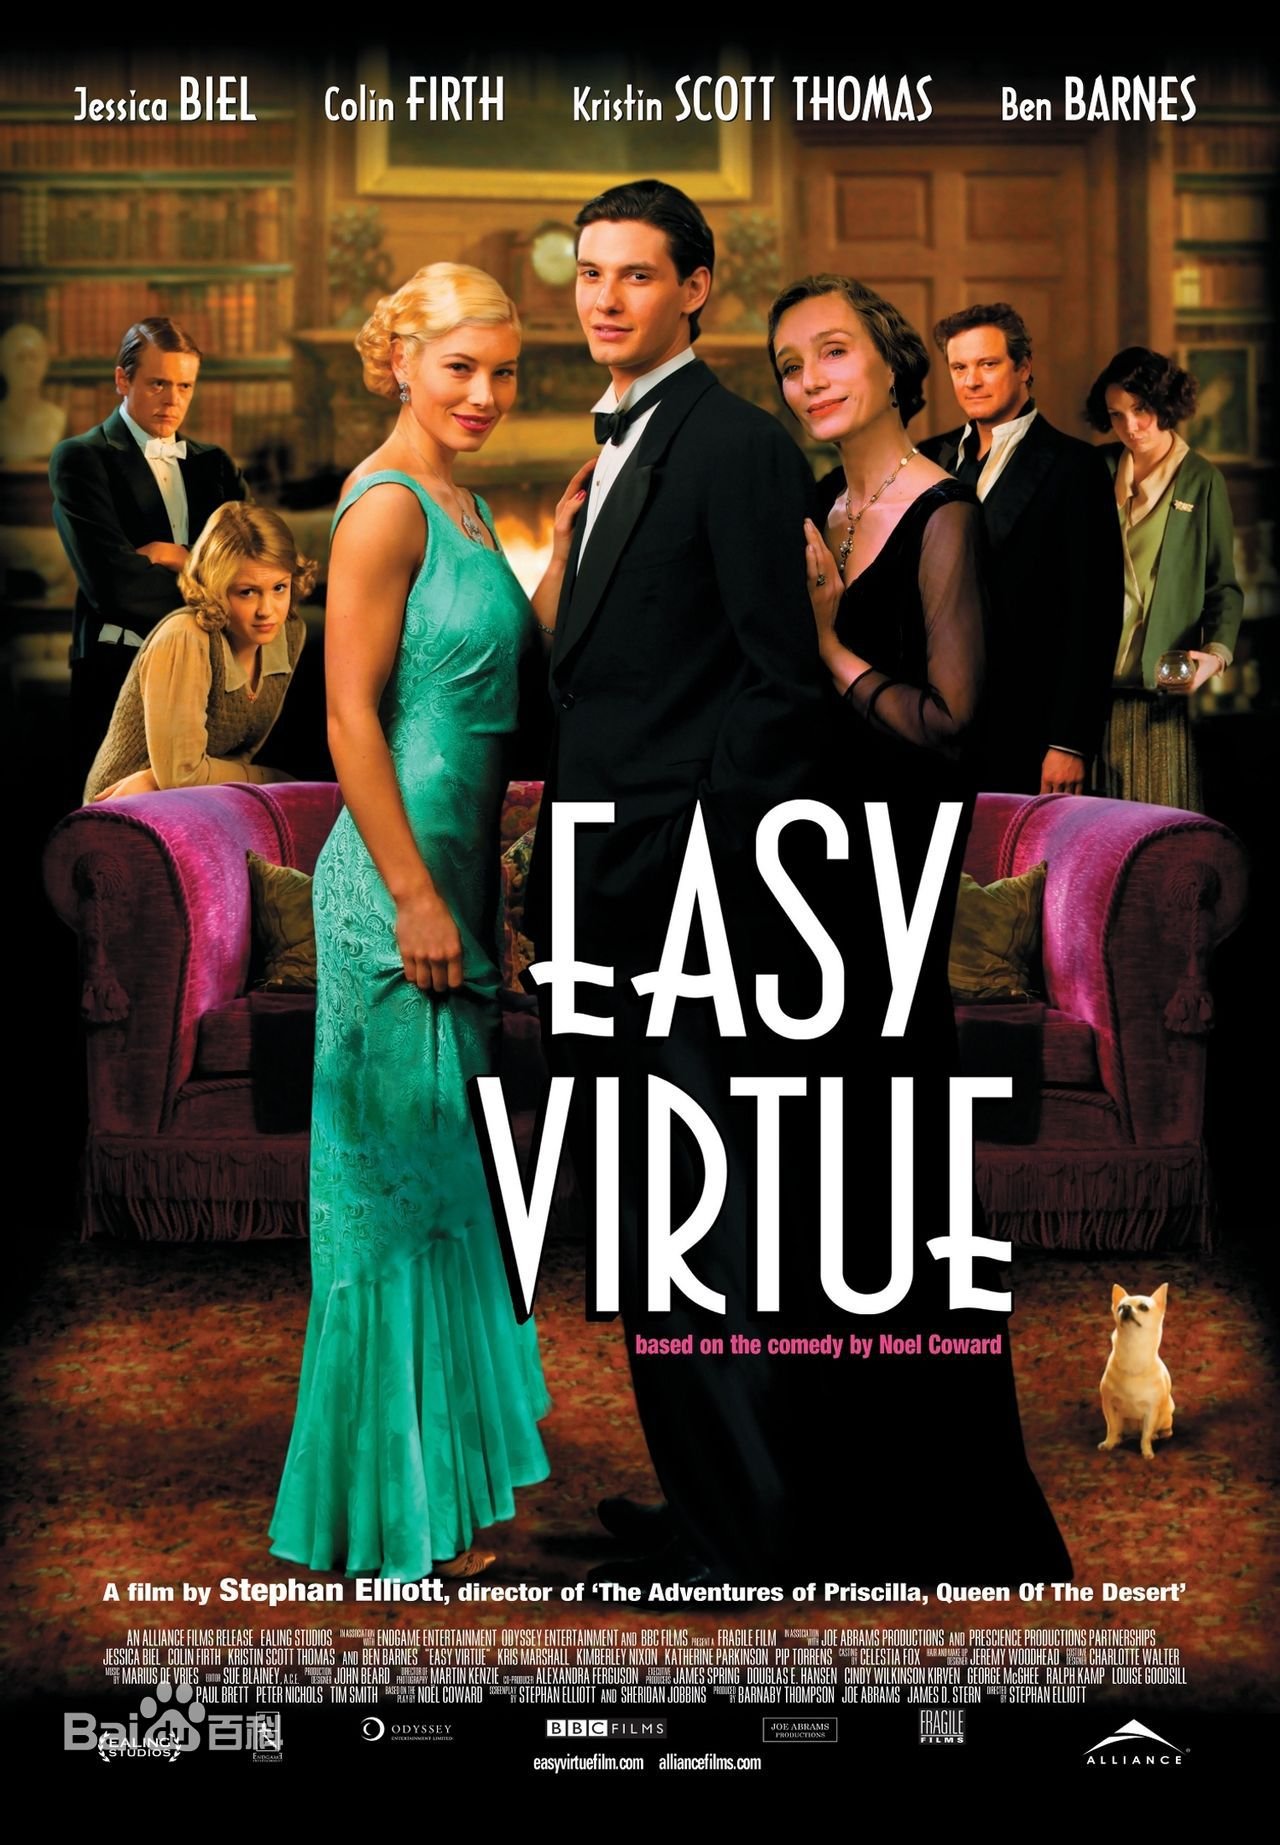 Easy Virtue (2008) Canadian poster